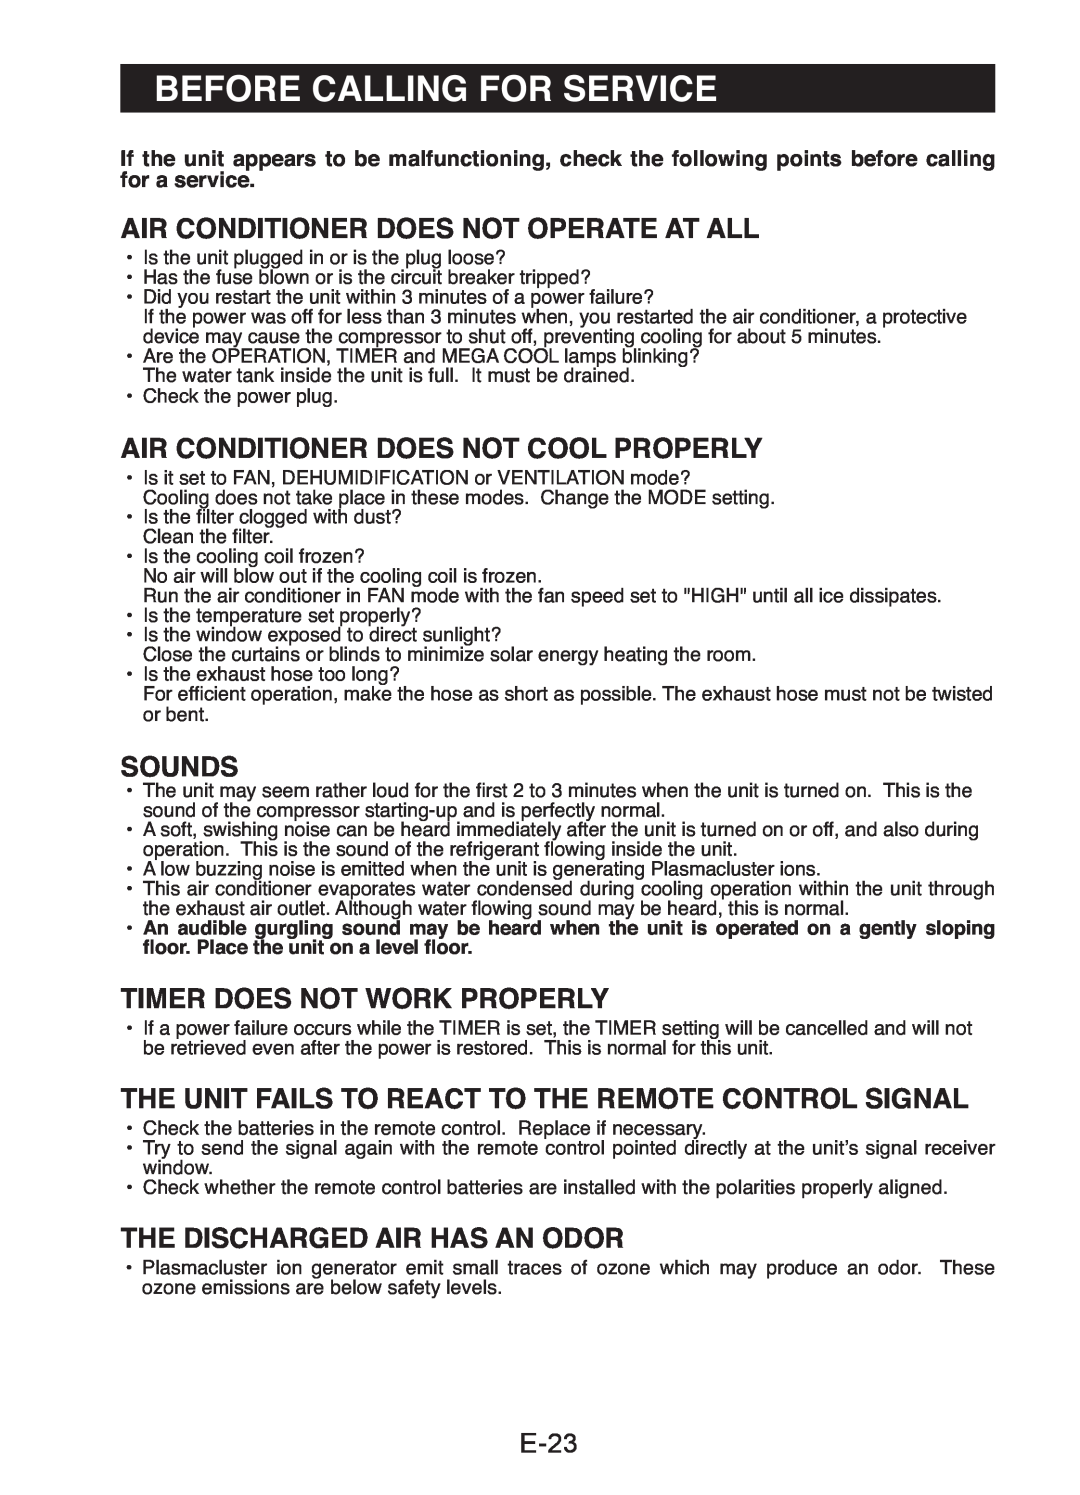 Sharp CV-P13LJ, CV-P10LJ operation manual Before Calling For Service, E-23, Air Conditioner Does Not Operate At All, Sounds 